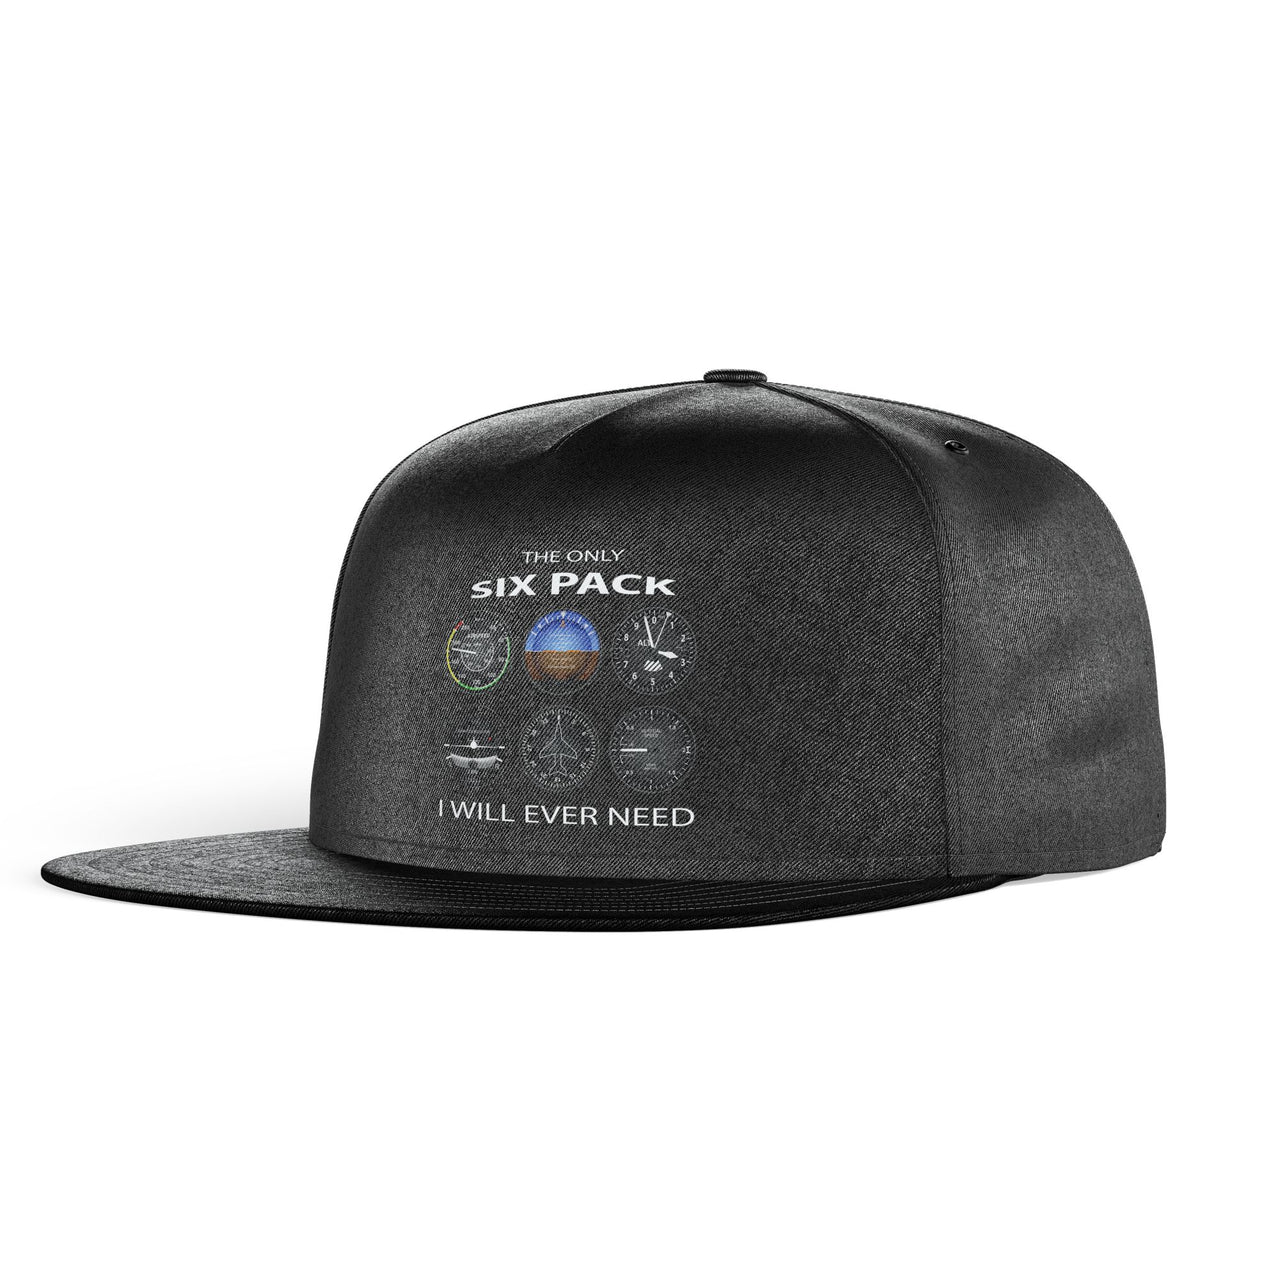 The Only Six Pack I Will Ever Need Designed Snapback Caps & Hats